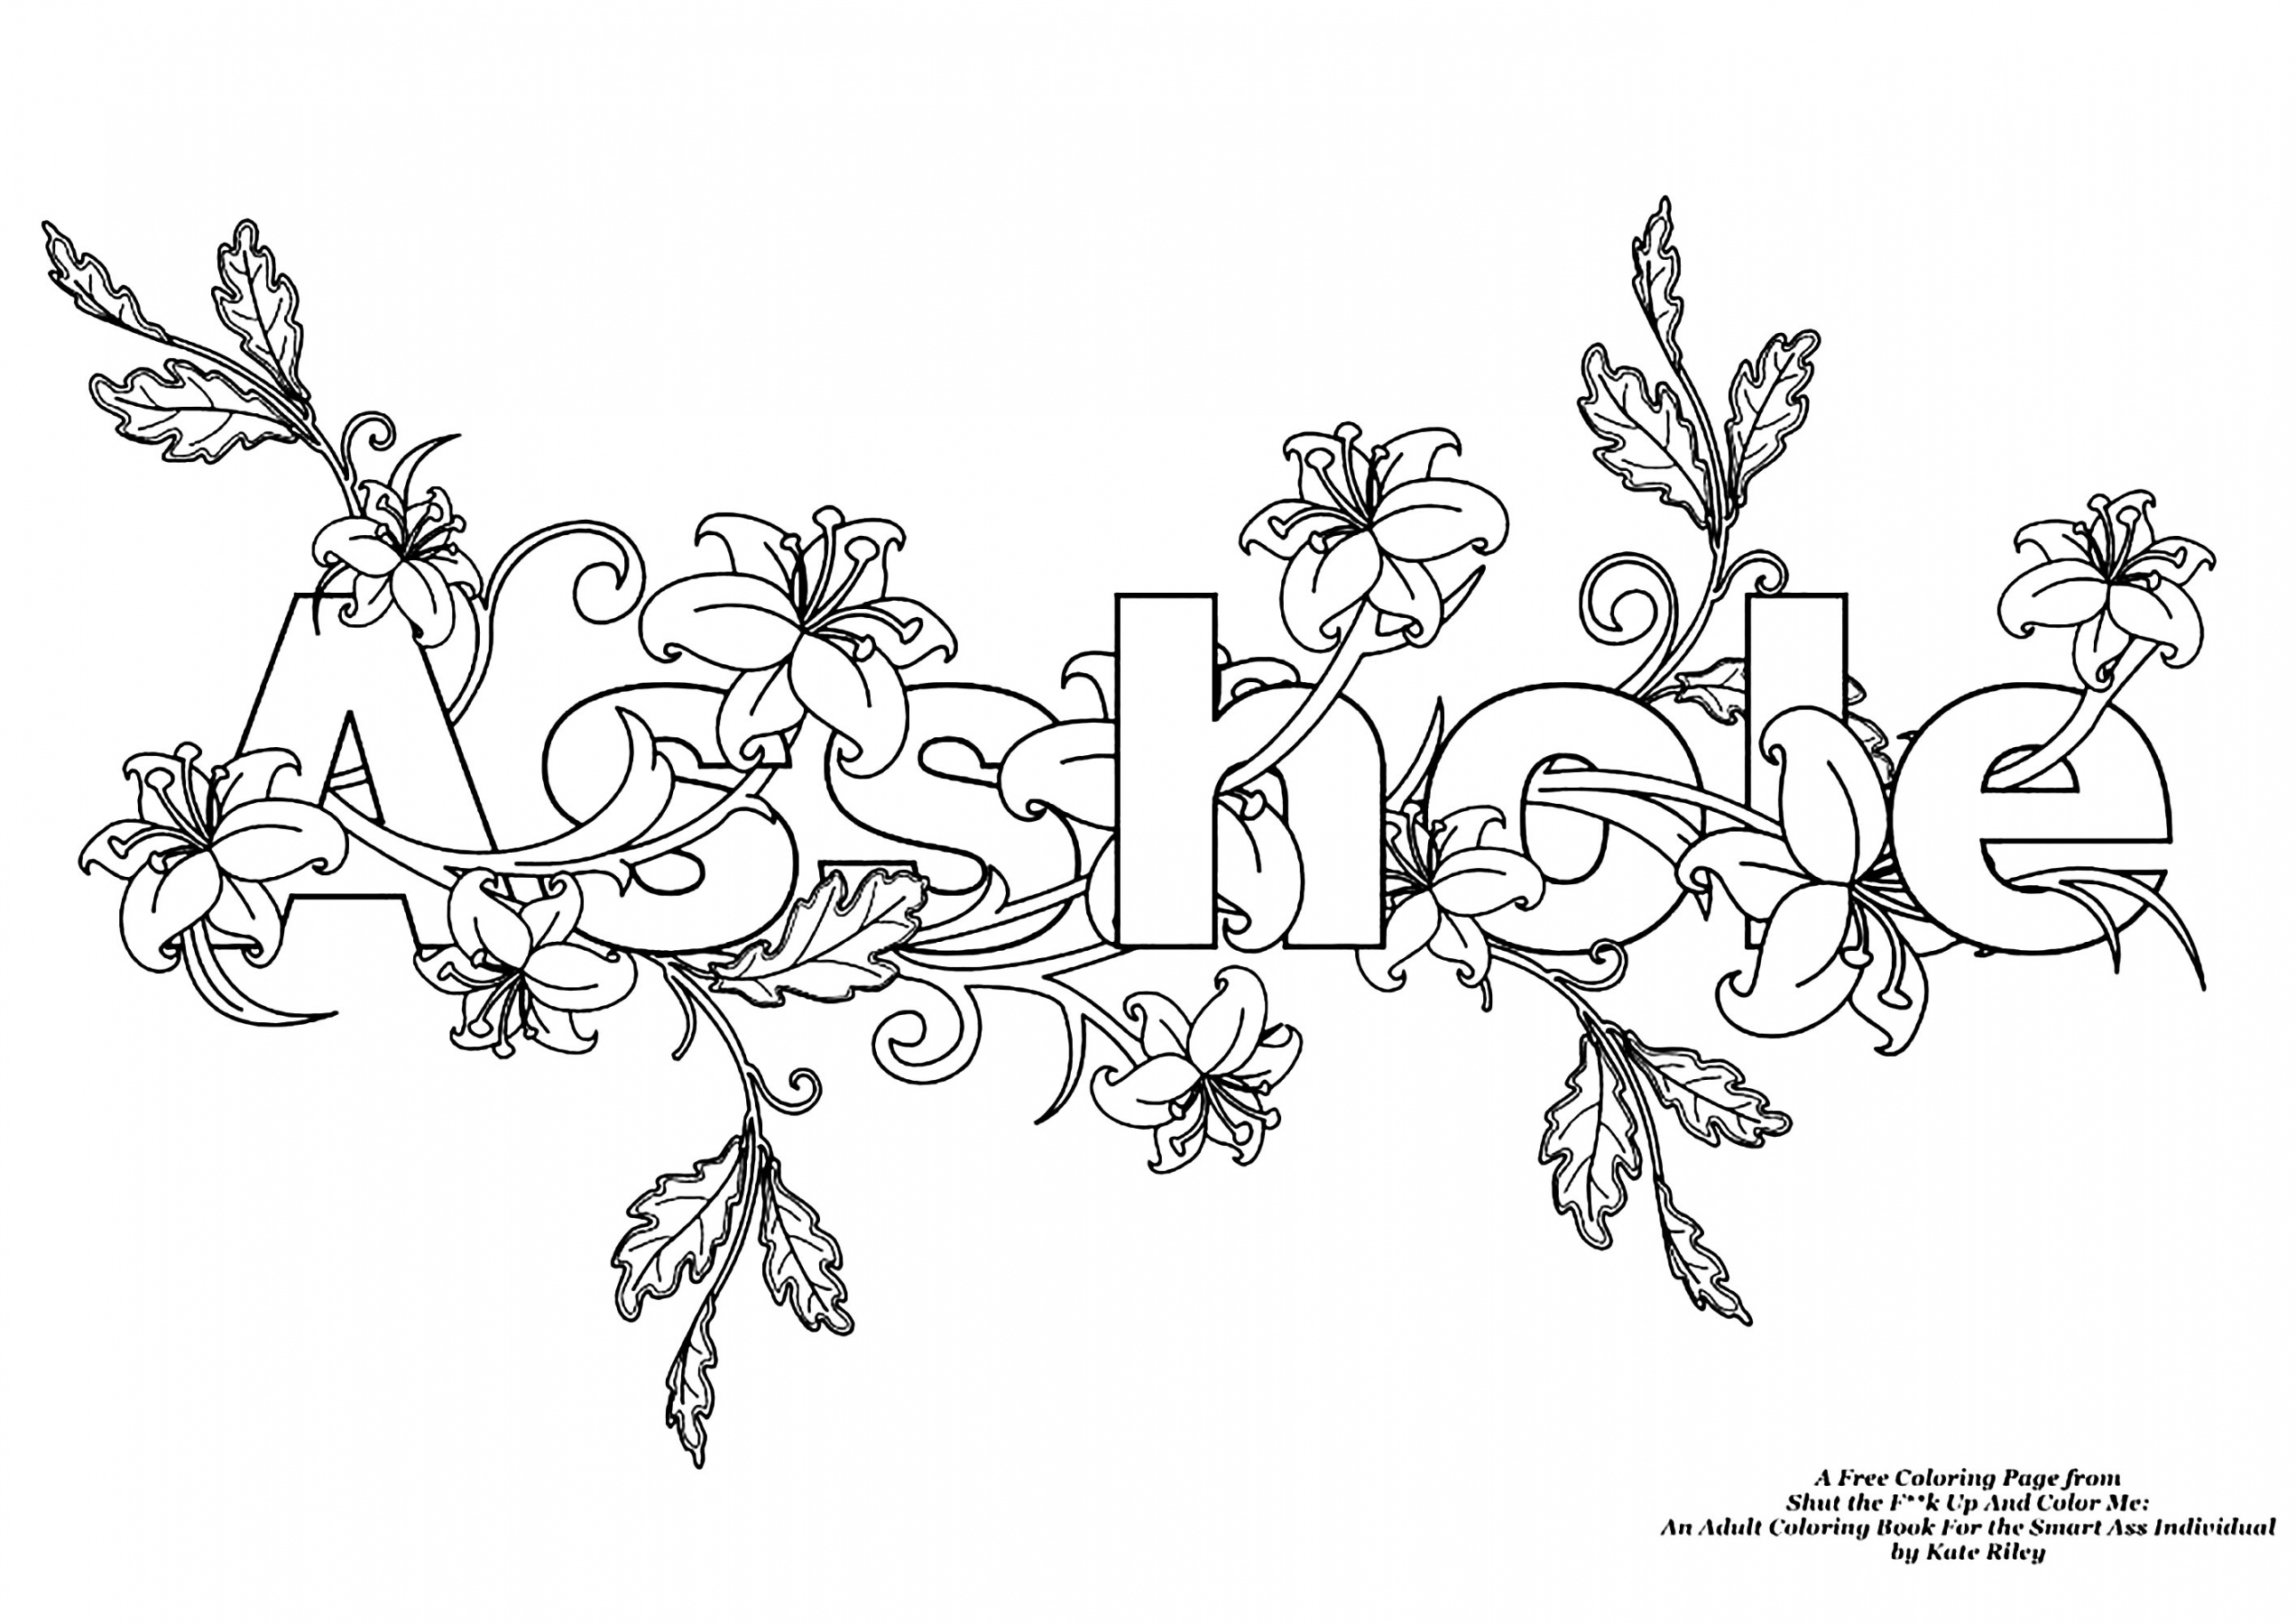 Asshole (Swear word coloring page) - Swear word Adult Coloring Pages - FREE Printables - Free Printable Inappropriate Coloring Pages For Adults